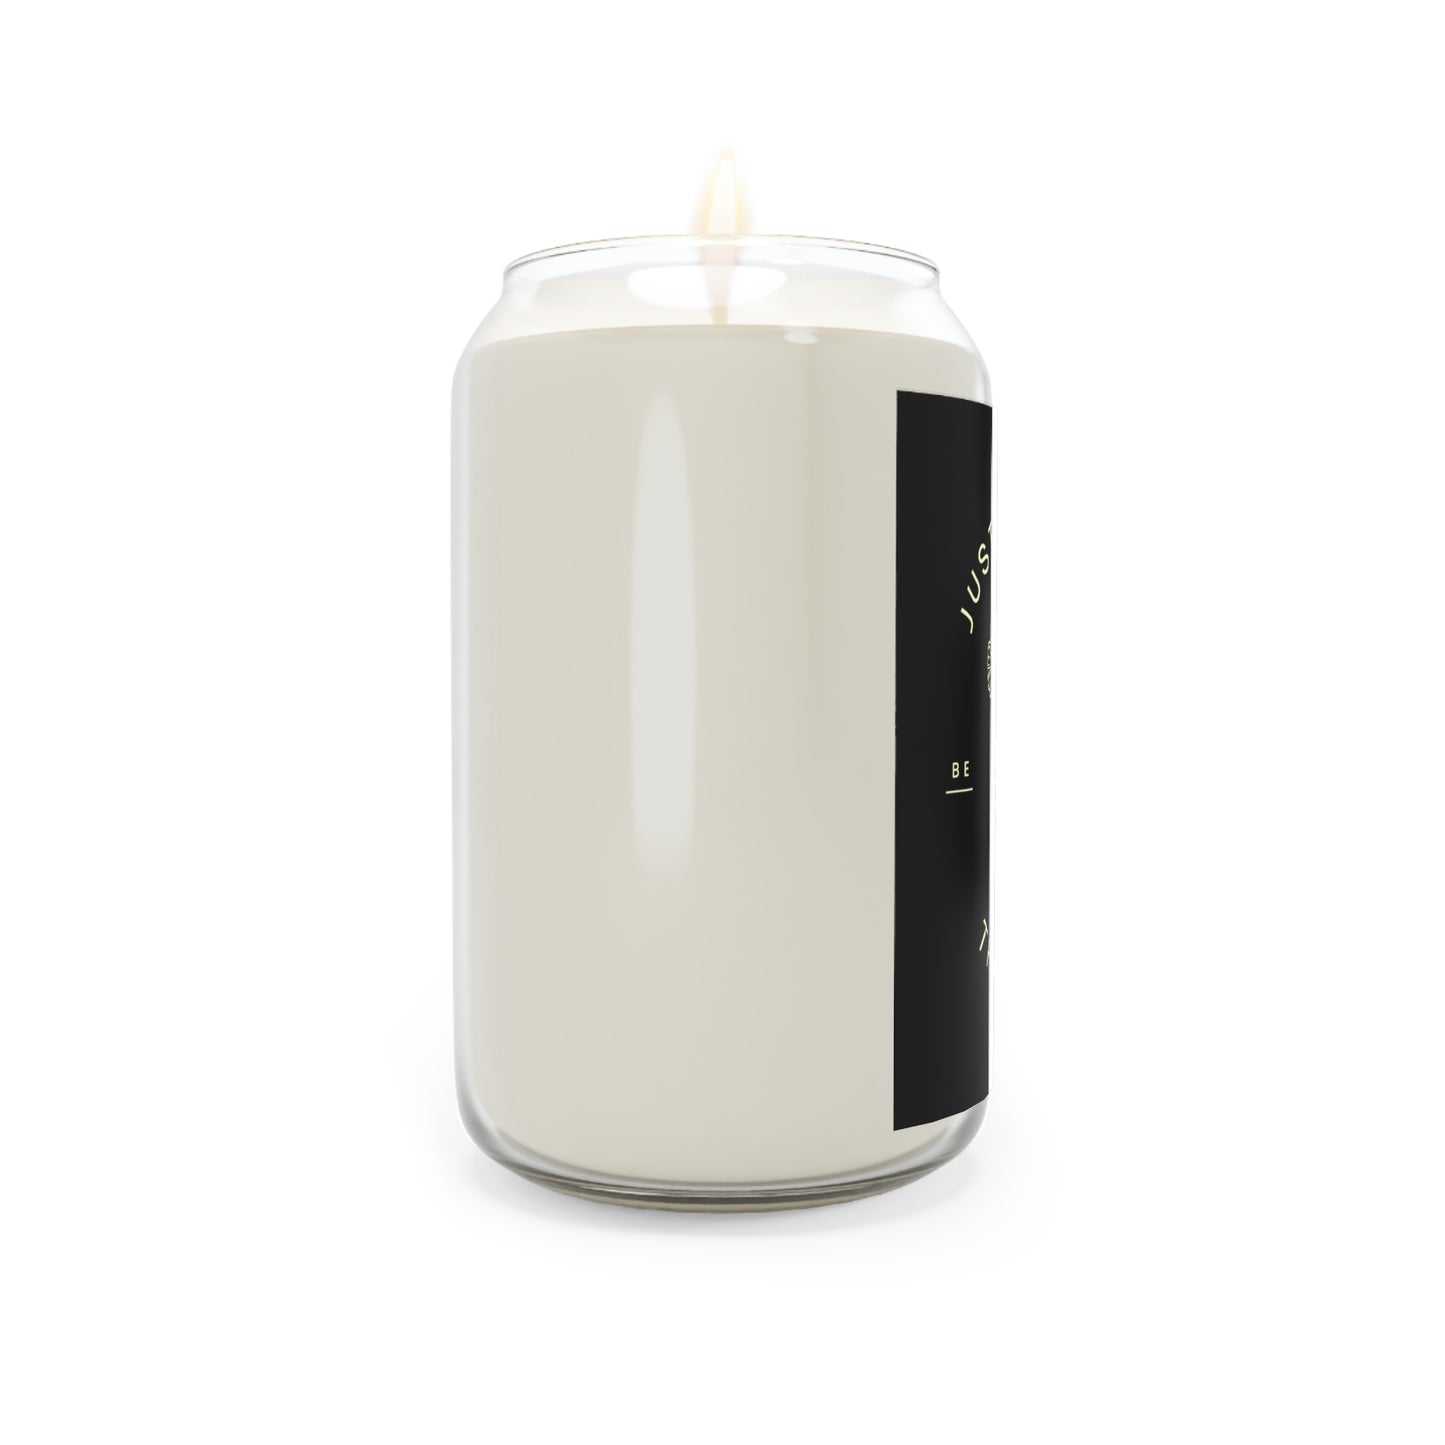 BE Vanilla Scented Candle